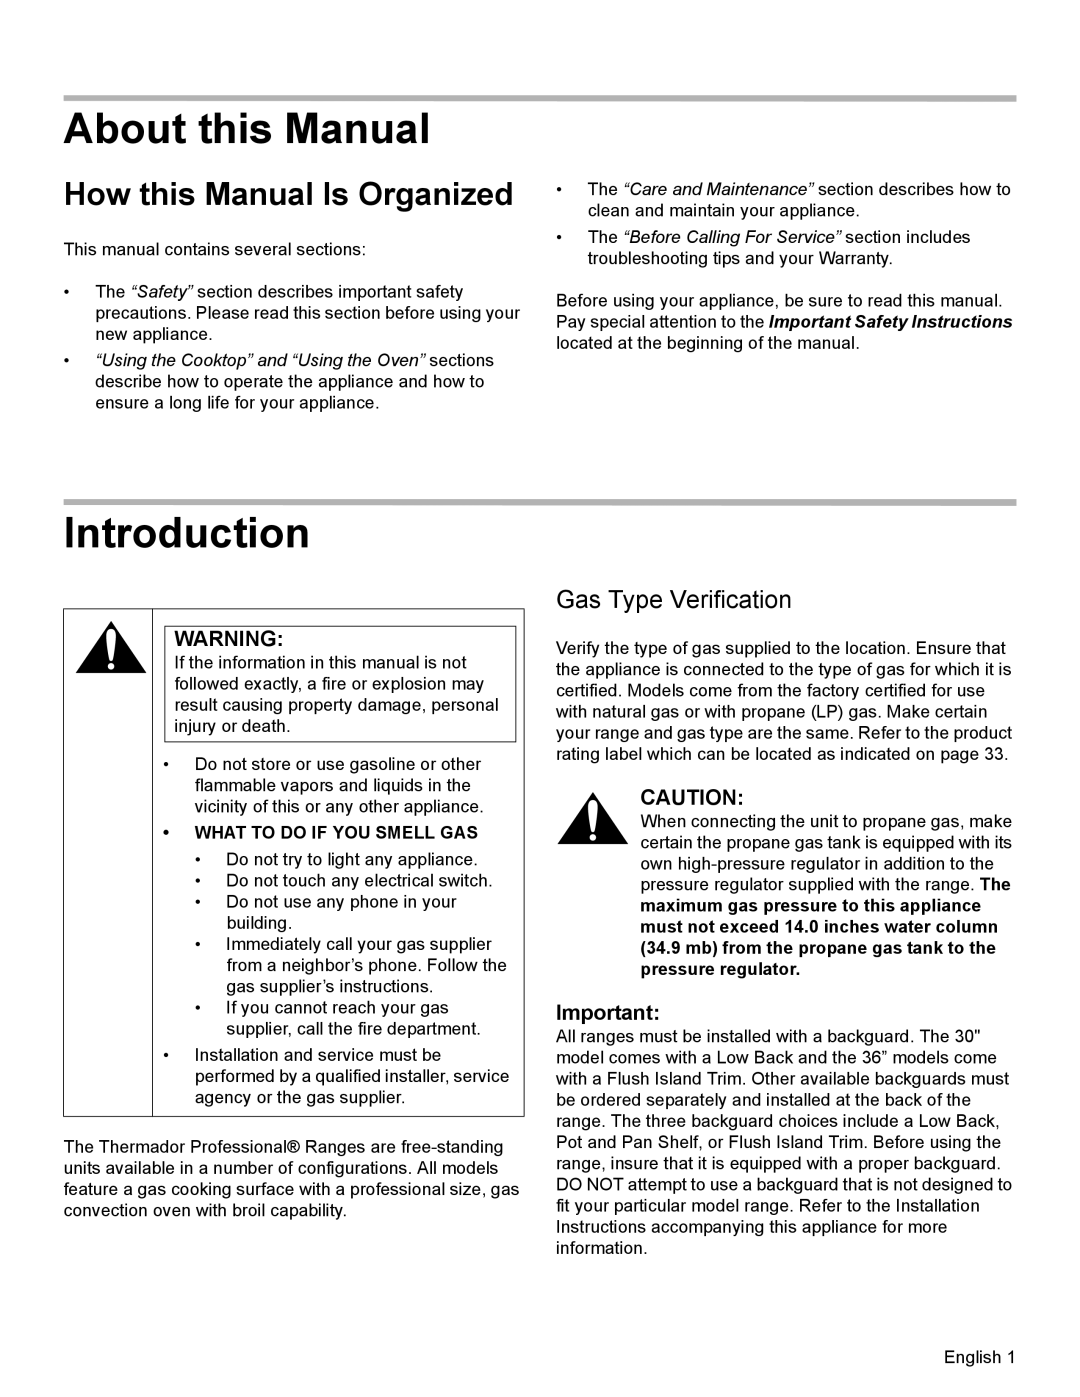 Thermador PRL36, PRG30, PRL30 manual About this Manual, Introduction, How this Manual Is Organized, Gas Type Verification 